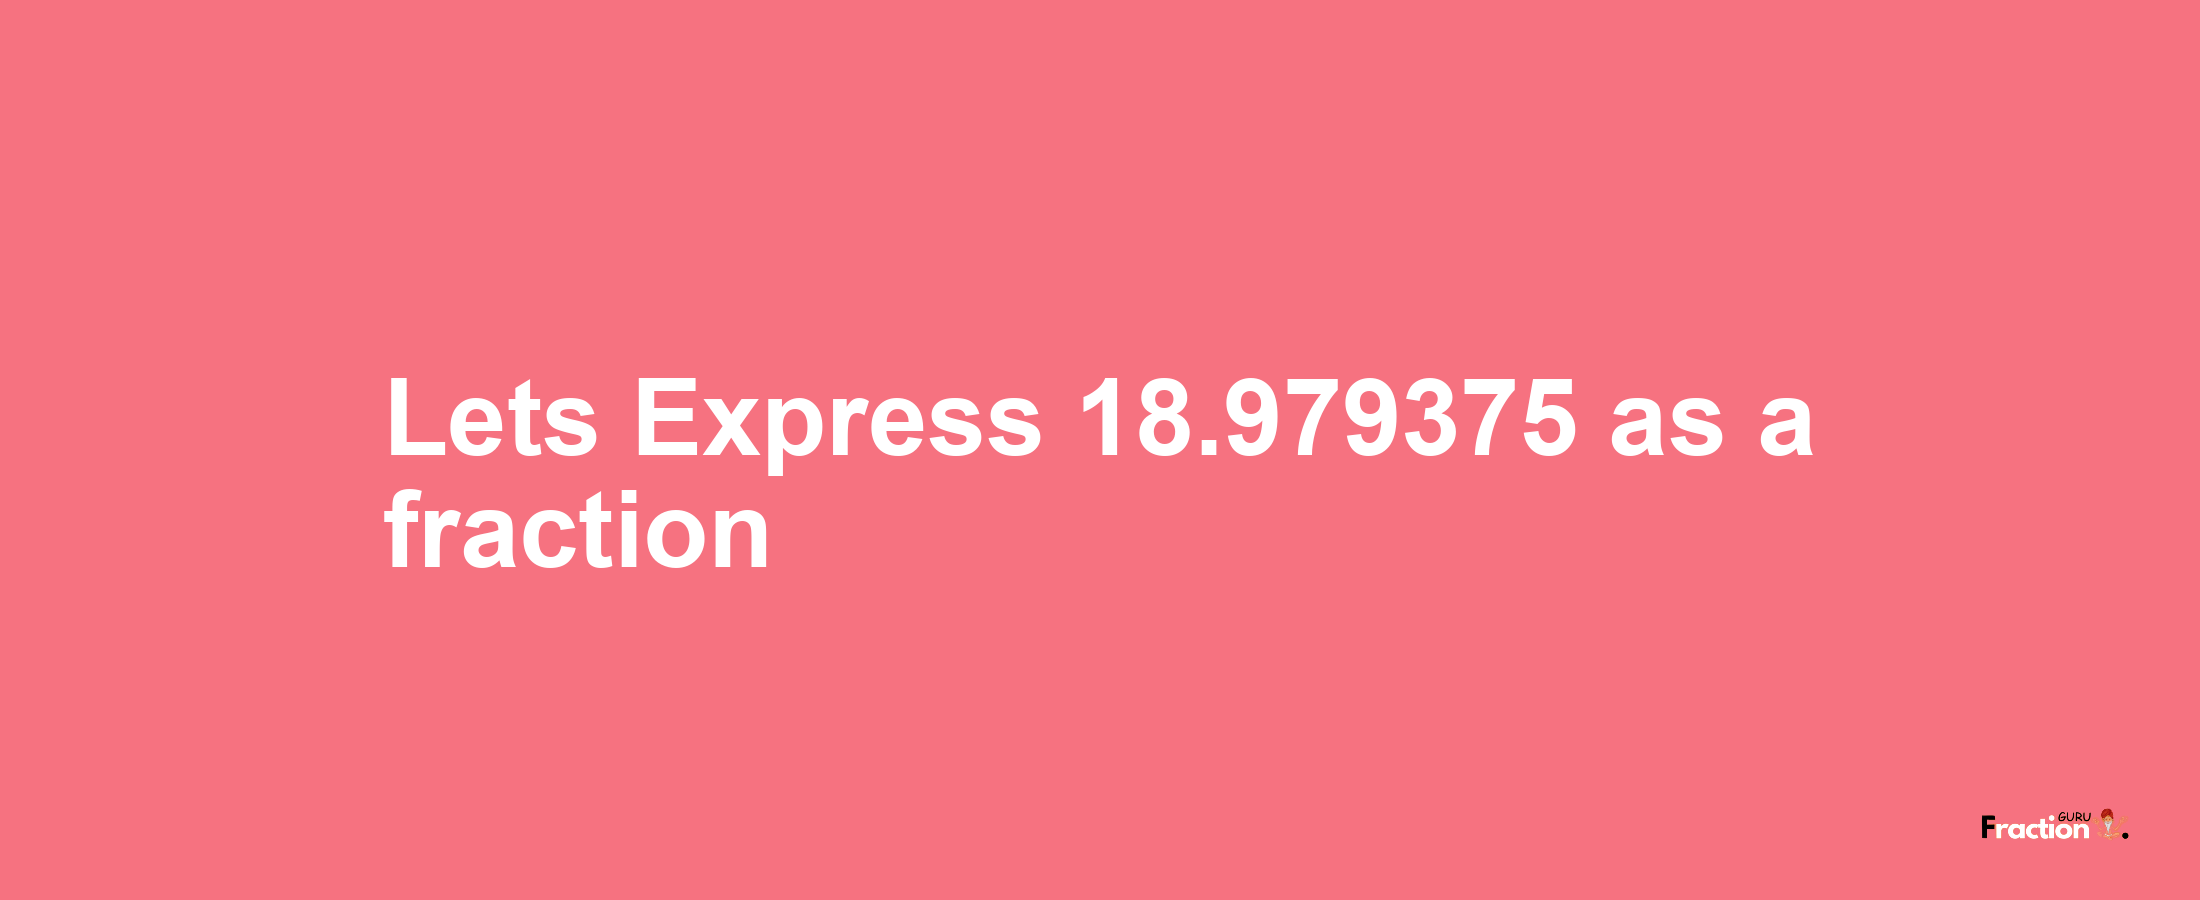 Lets Express 18.979375 as afraction